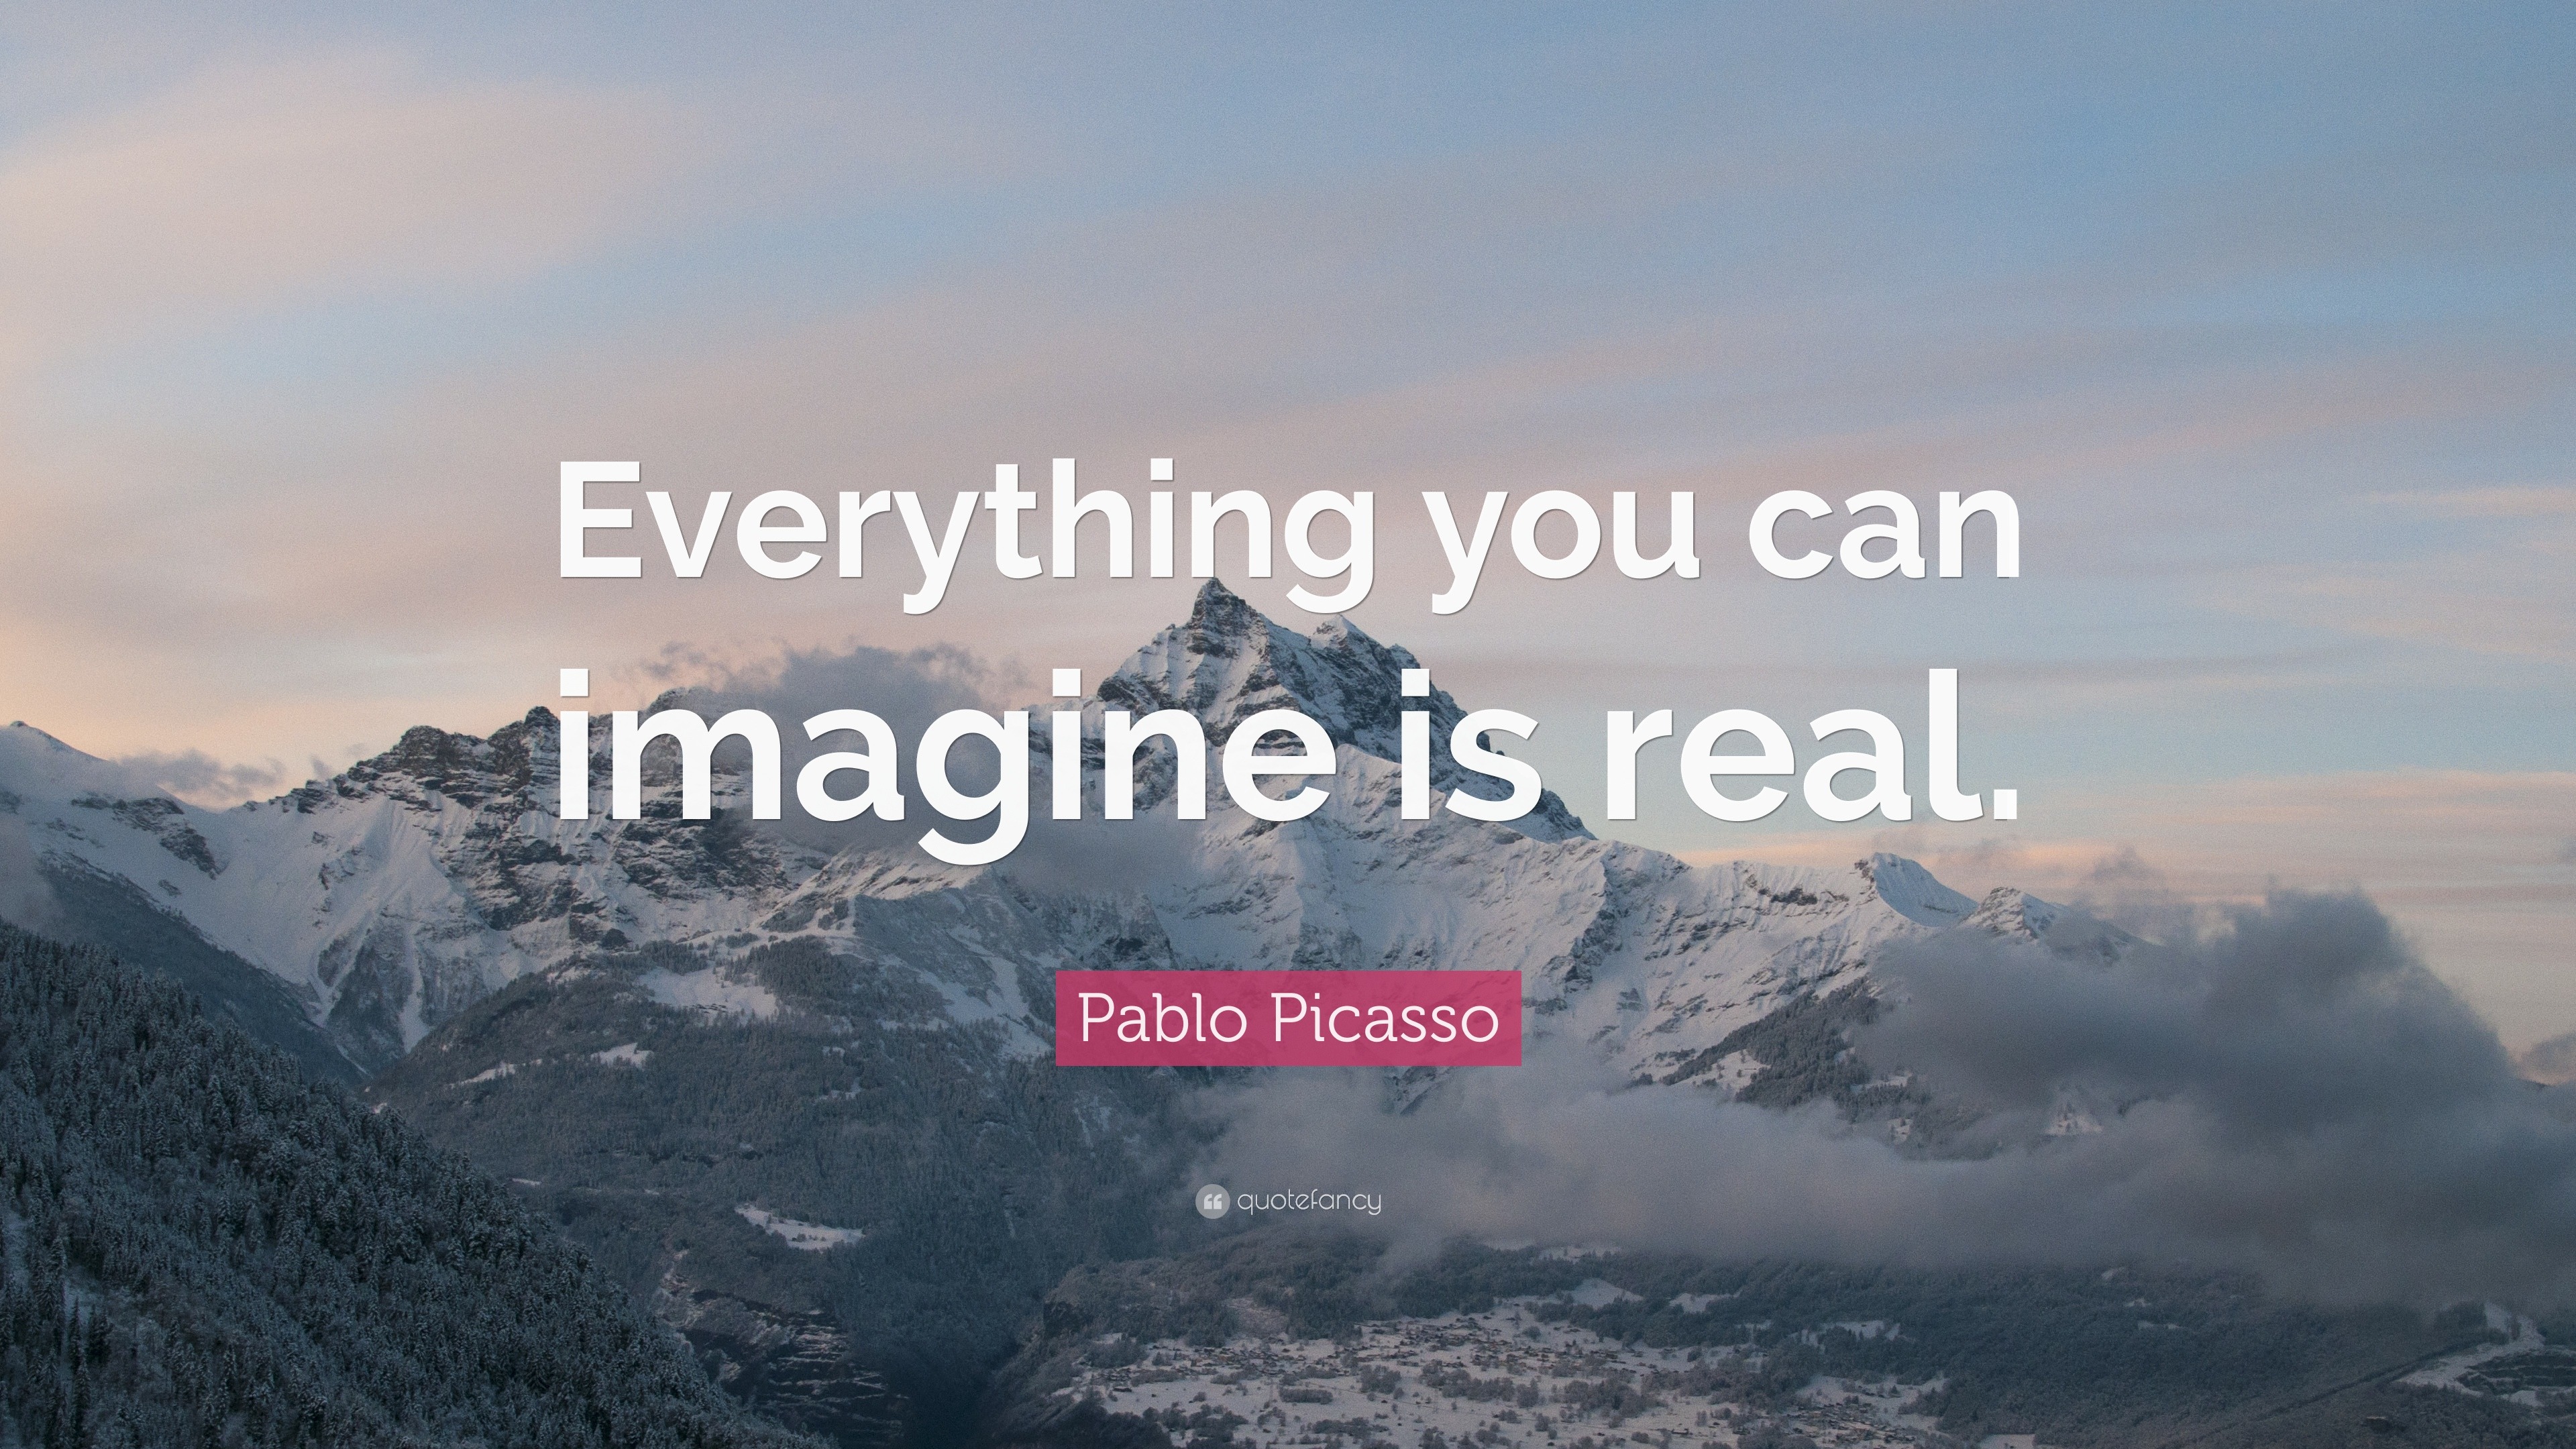 23569 Pablo Picasso Quote Everything You Can Imagine Is Real 